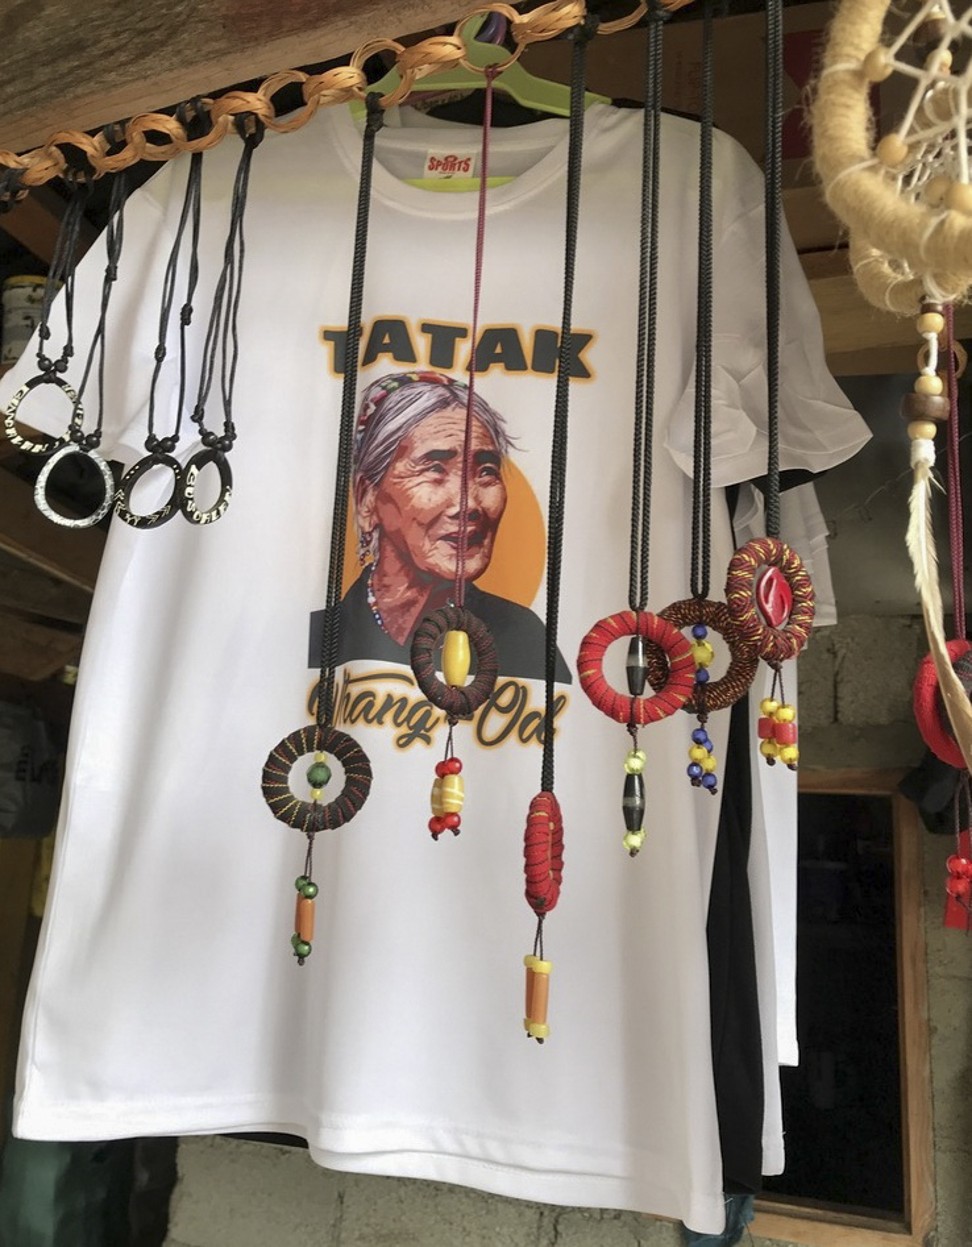 T-shirts emblazoned with the face of the elder tattooist Whang-od for sale in the village. Photo: Ian Gill